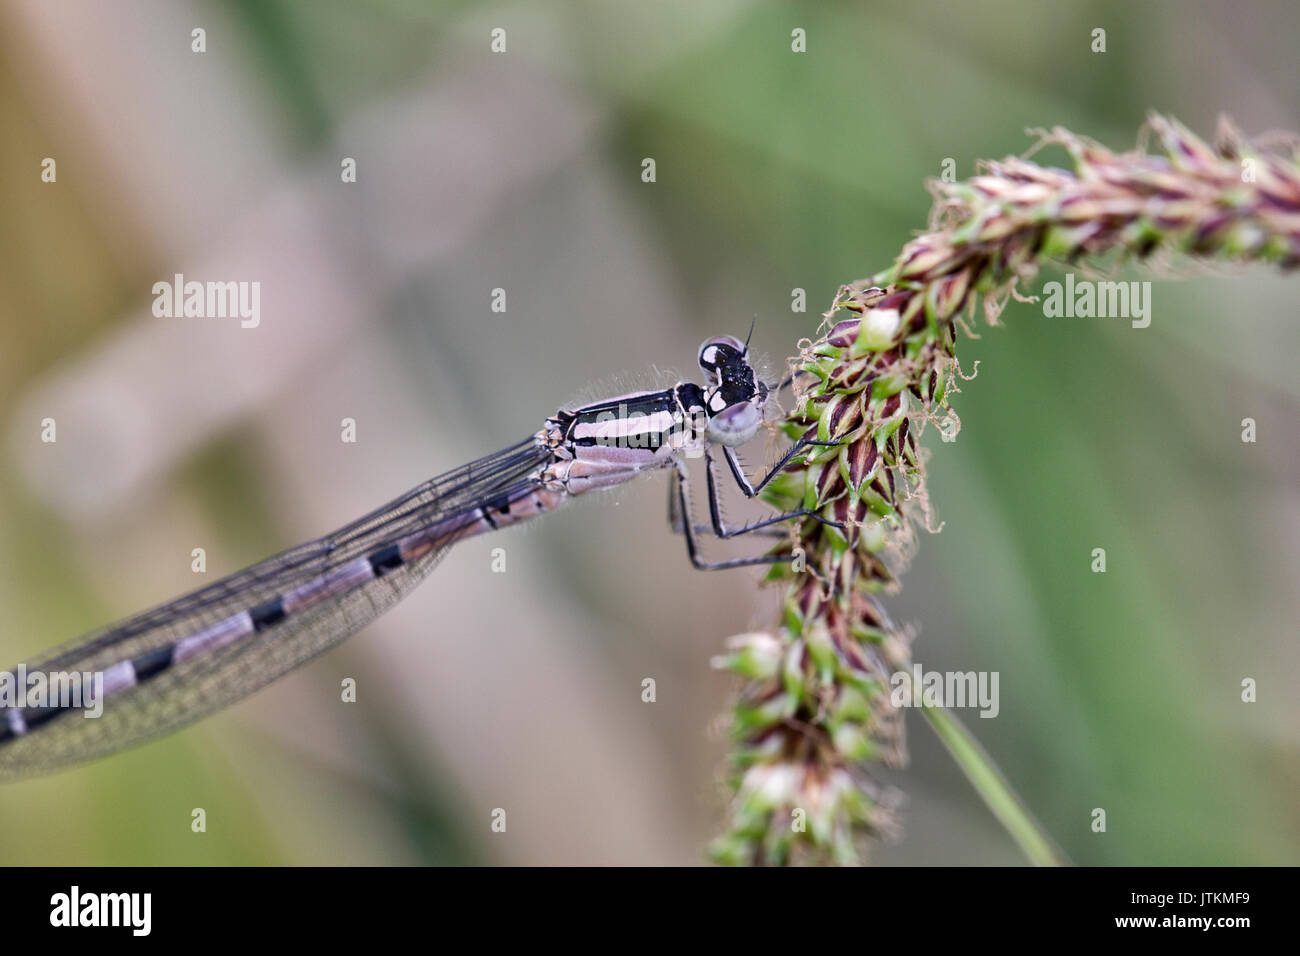 Close up of female common blue damsel fly on wild grass Stock Photo